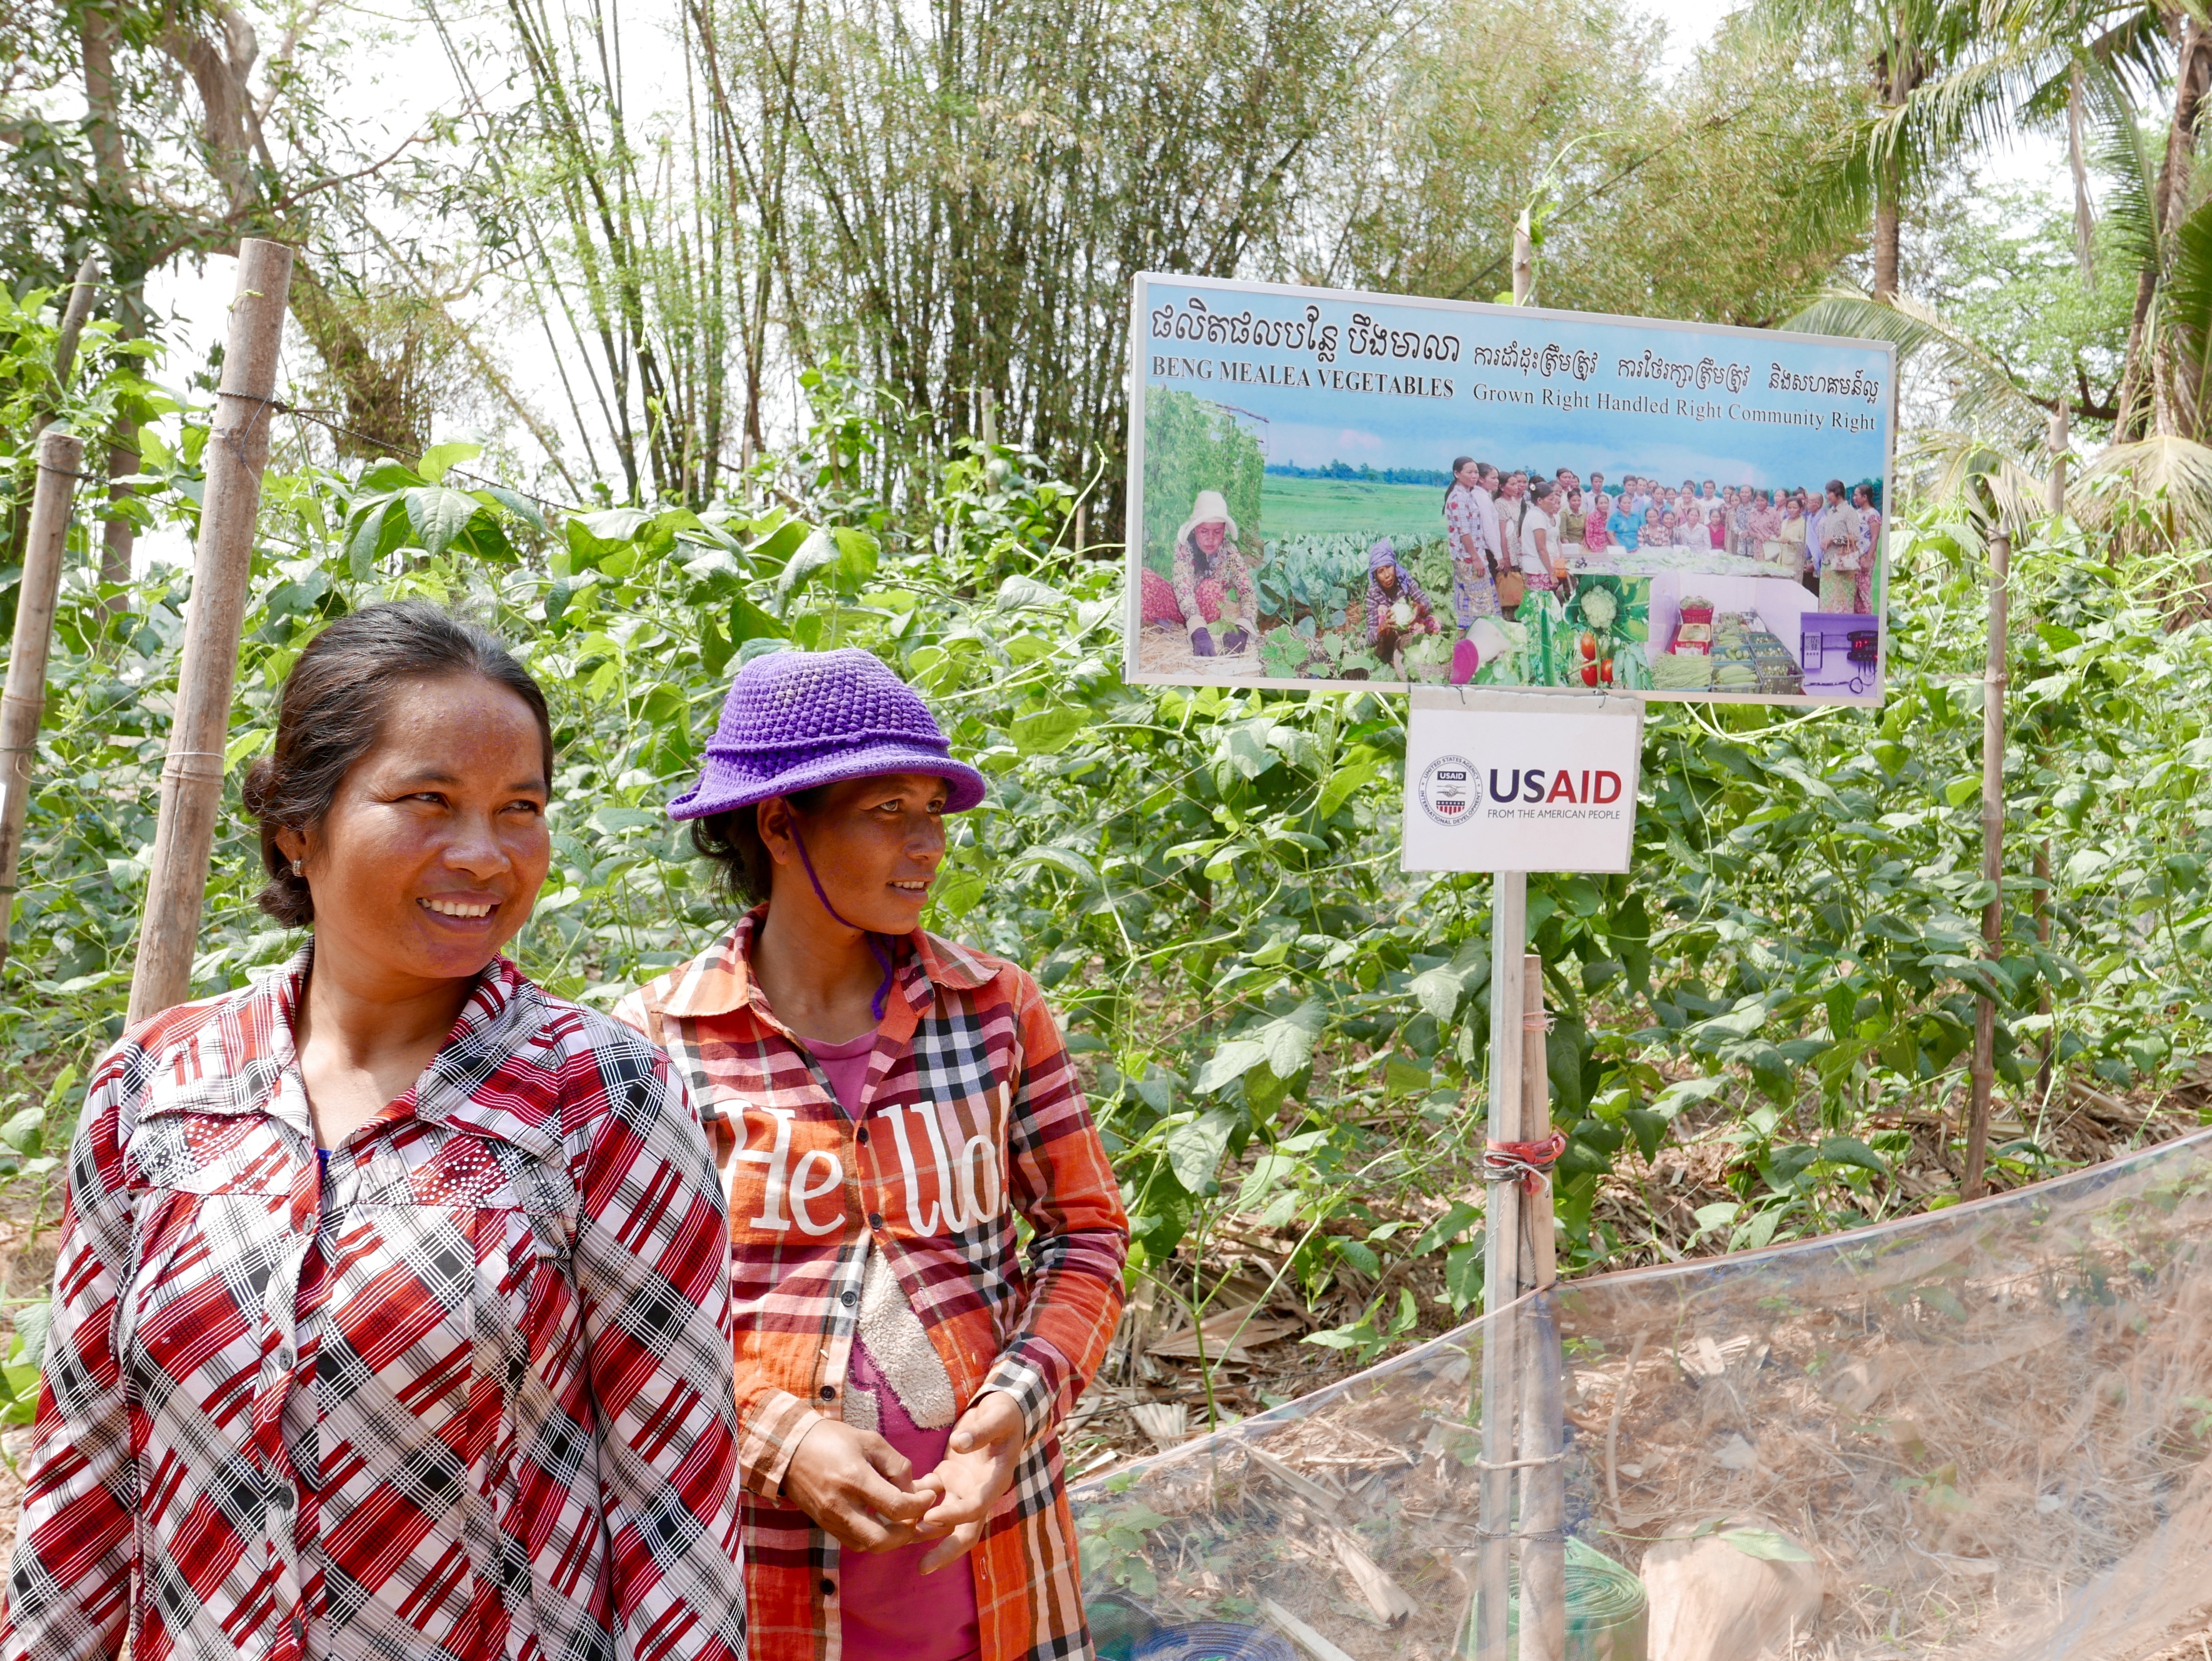 Women farmers growing vegetables with conservation agriculture practices and drip irrigation in Cambodia, with project sign and USAID logo.